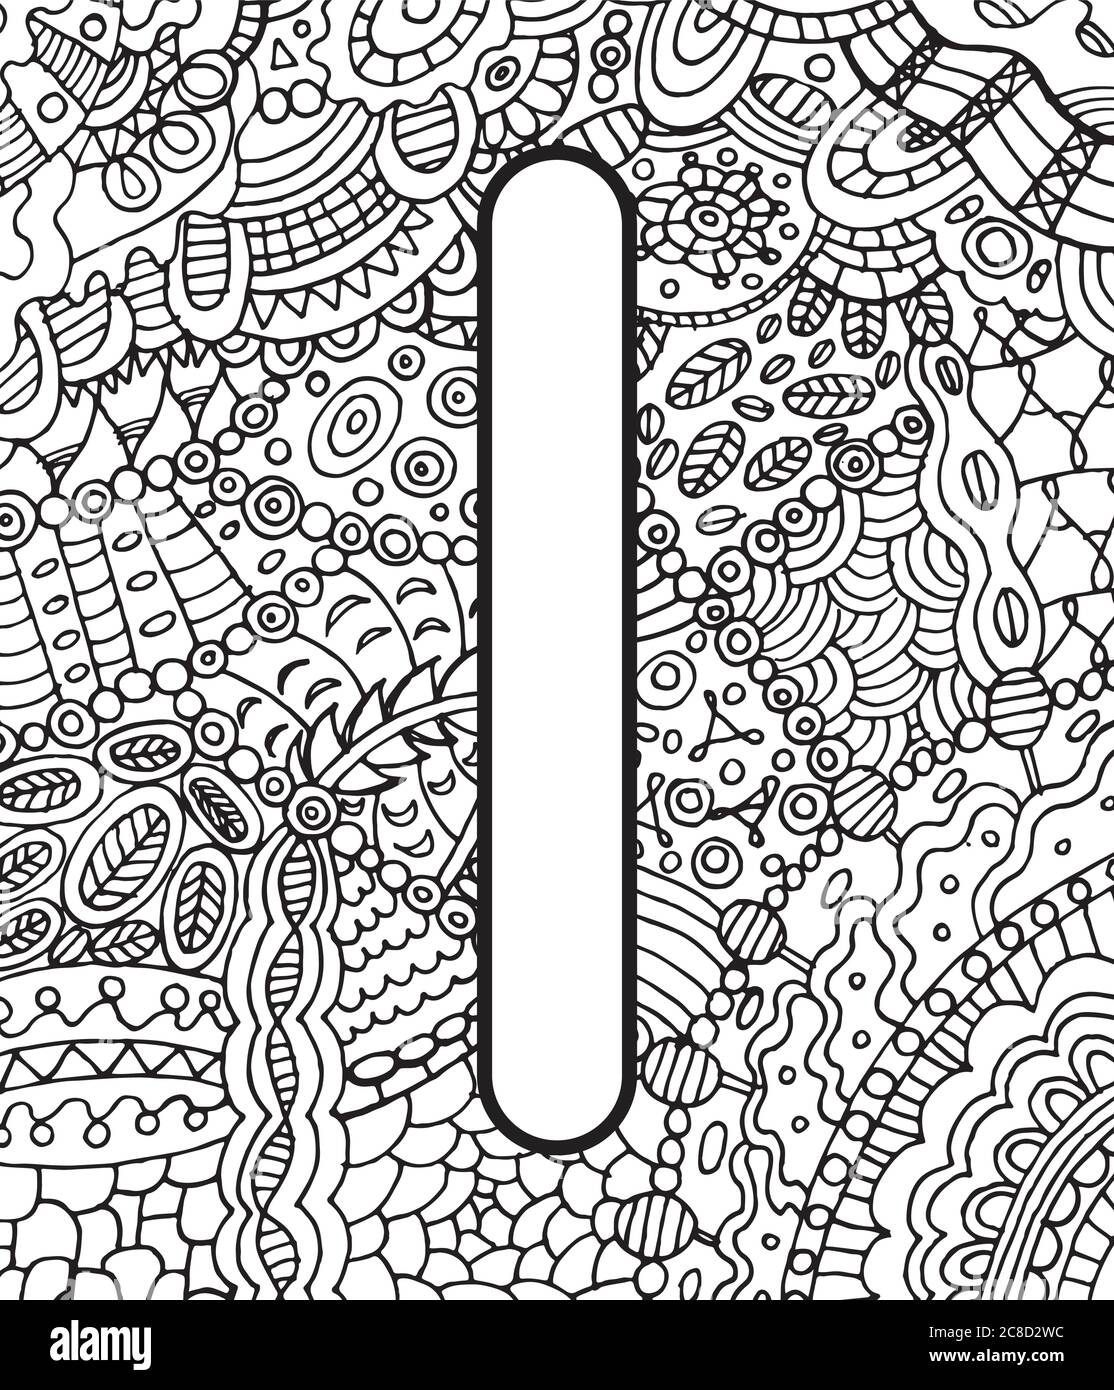 Ancient scandinavic rune ice with doodle ornament background coloring page for adults psychedelic fantastic mystical artwork vector illustration stock vector image art